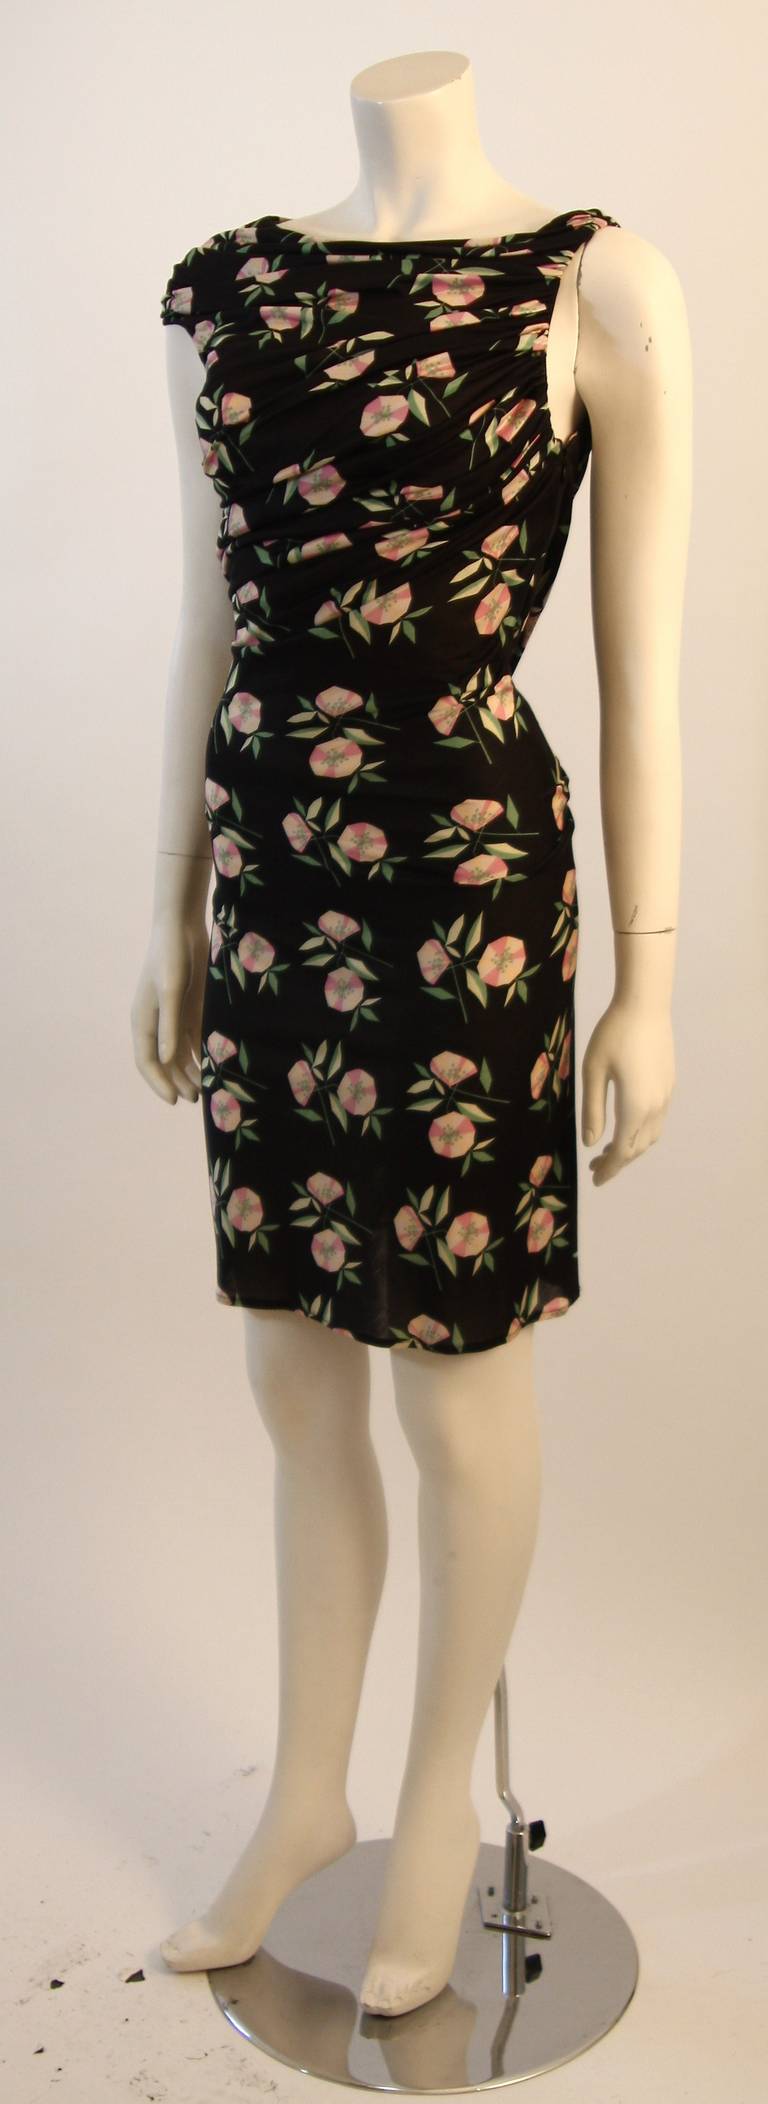 Gianni Versace Black with Pink Roses Ruched Silk Jersey Dress Size 40 In Excellent Condition For Sale In Los Angeles, CA